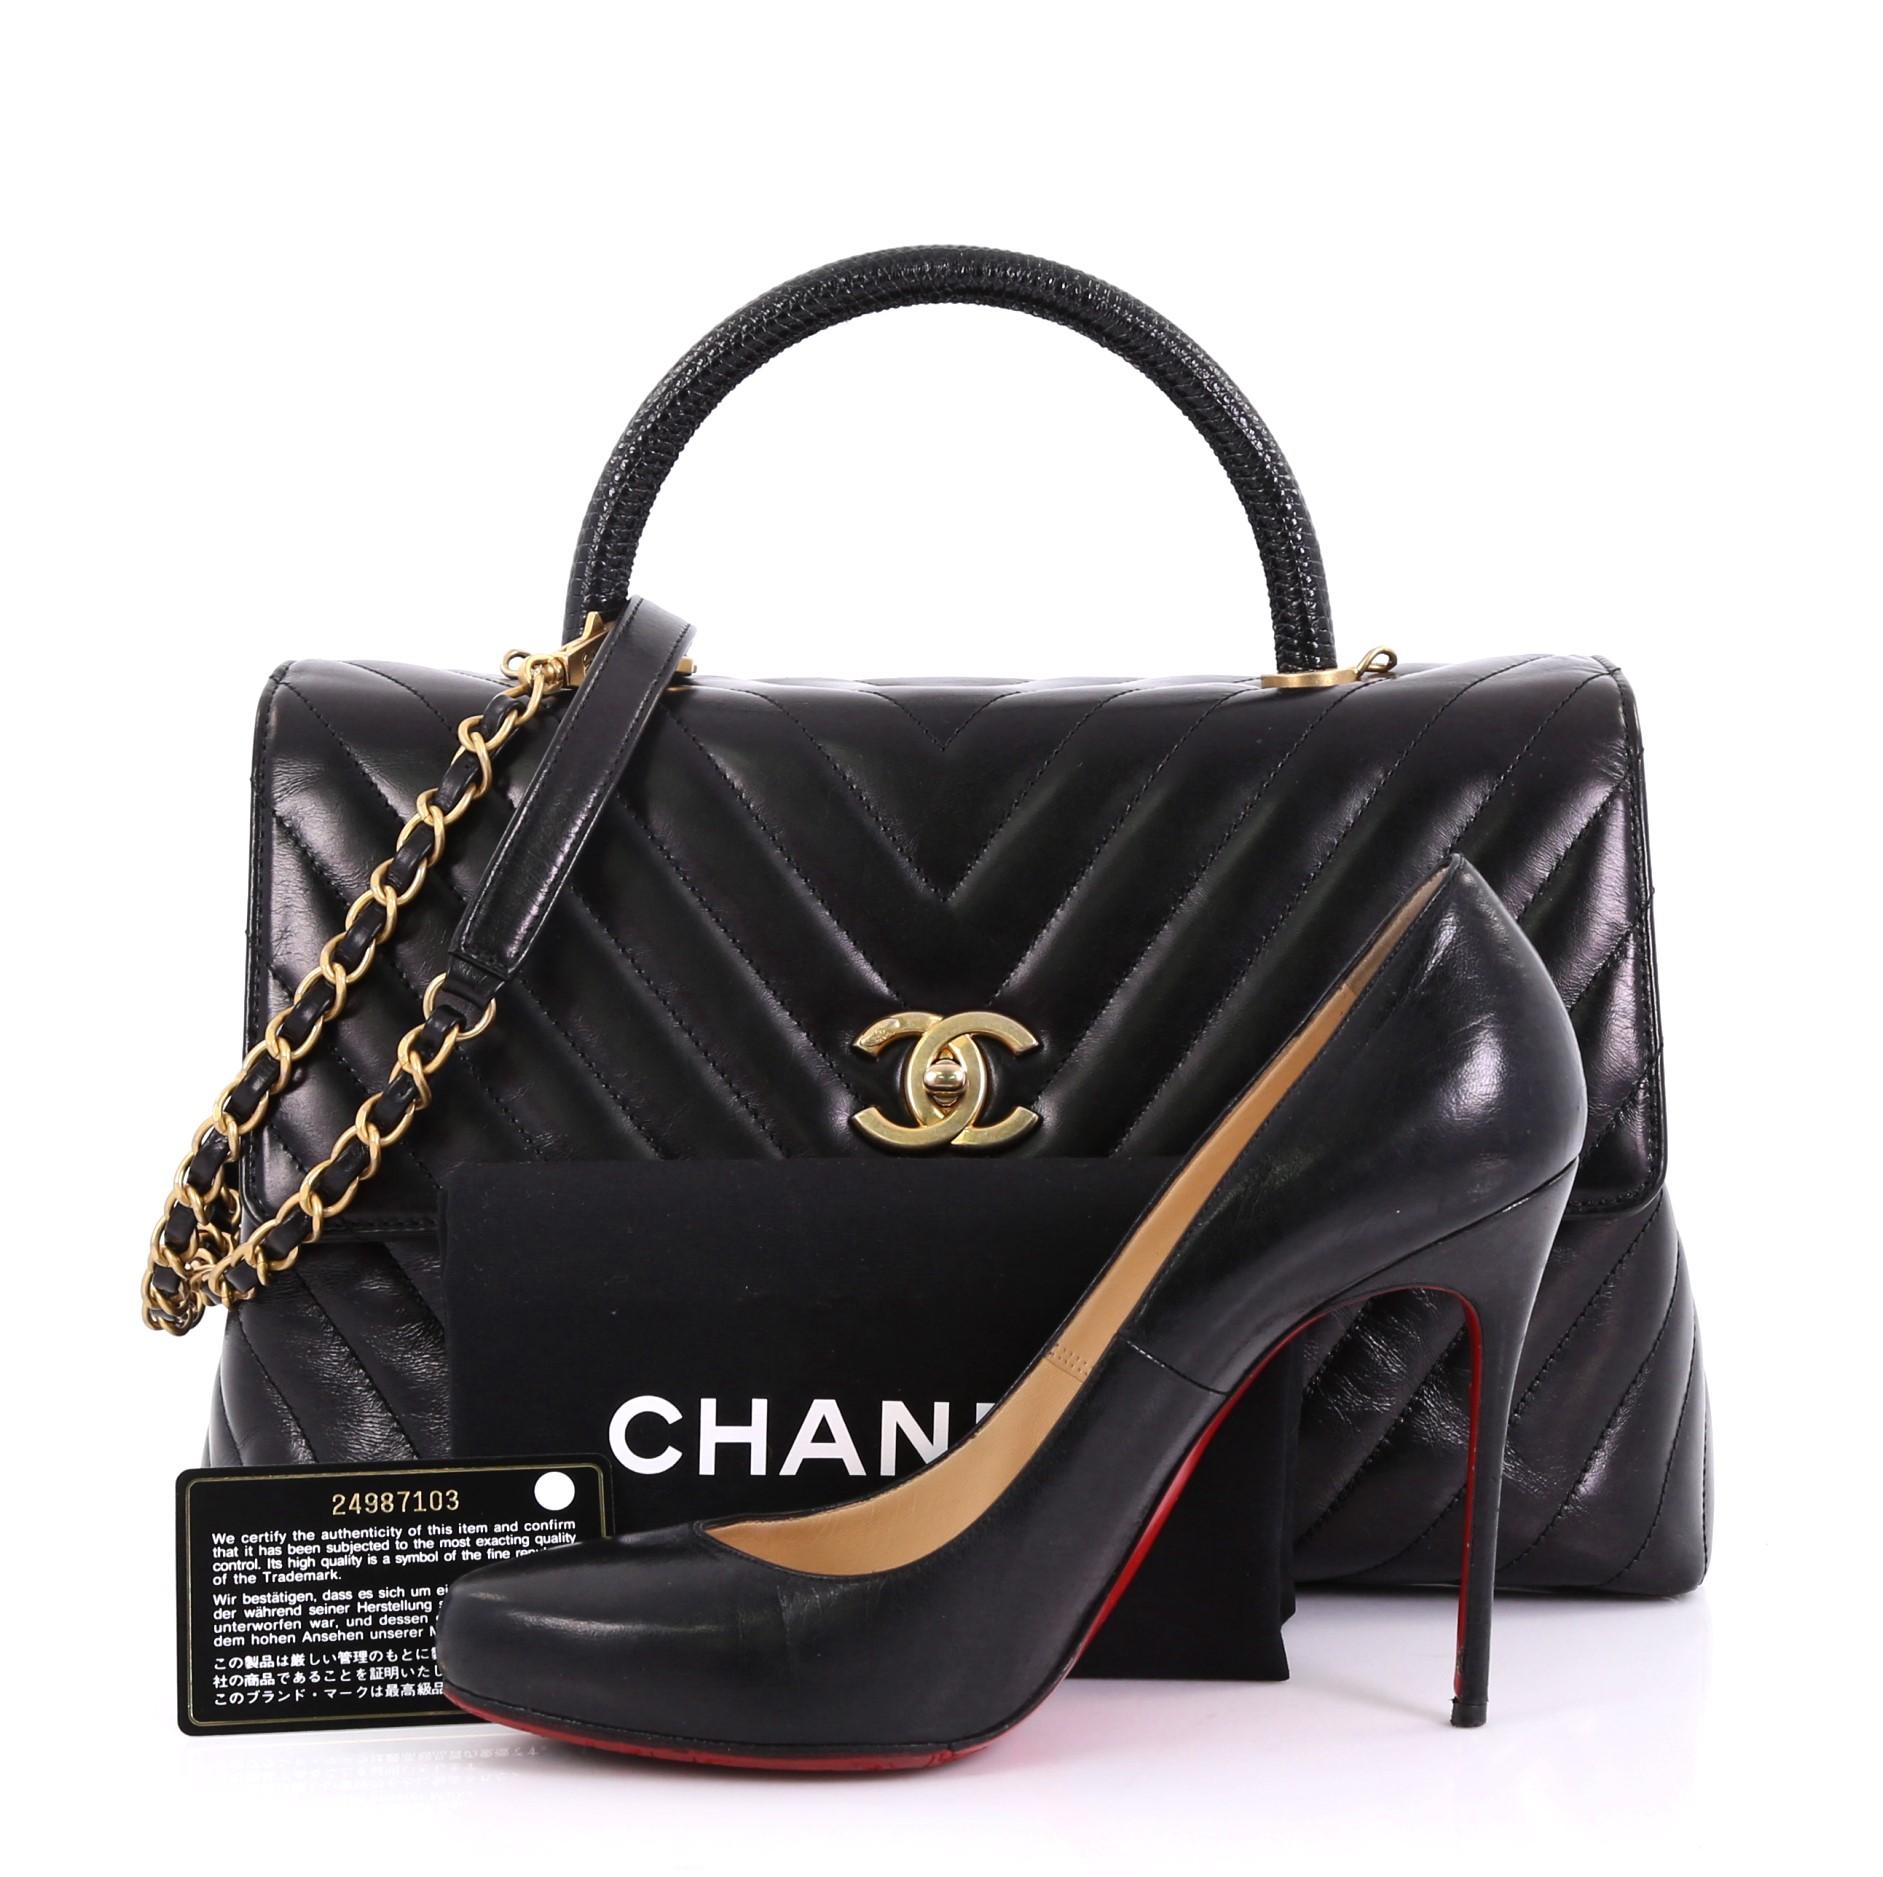 This Chanel Coco Top Handle Bag Chevron Calfskin with Lizard Medium, crafted in black chevron calfskin with genuine lizard, features a rolled top handle, woven-in leather chain link strap with leather pad, exterior back slip pocket, and gold-tone